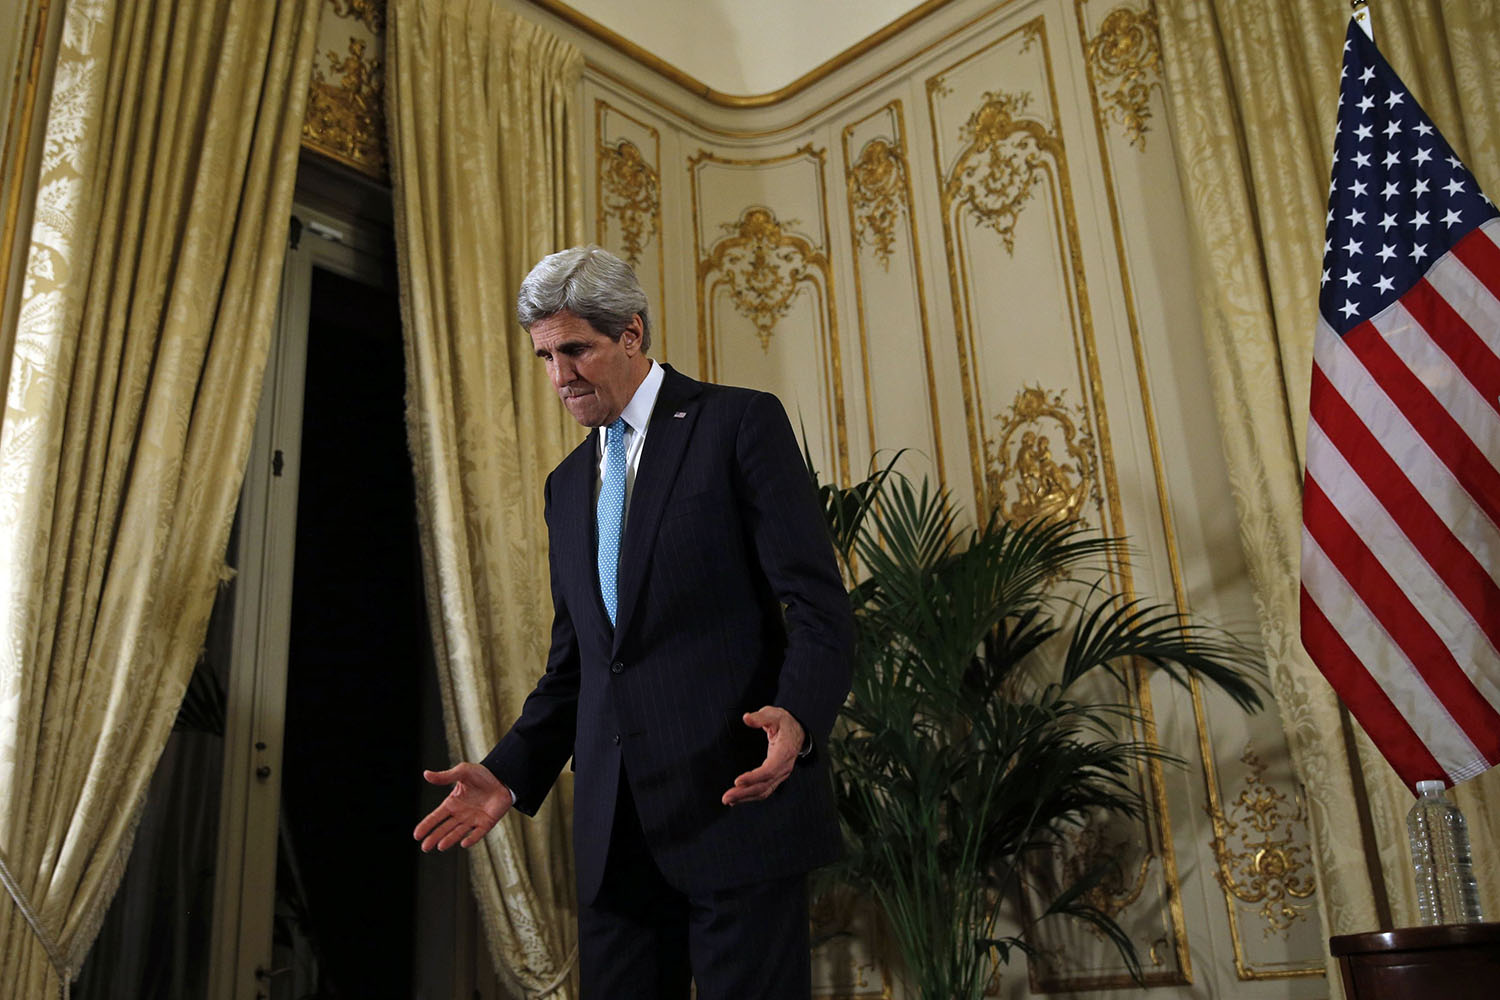 U.S. Secretary of State Kerry departs after speaking to reporters about the Ukraine crisis following his meetings with other foreign ministers in Paris